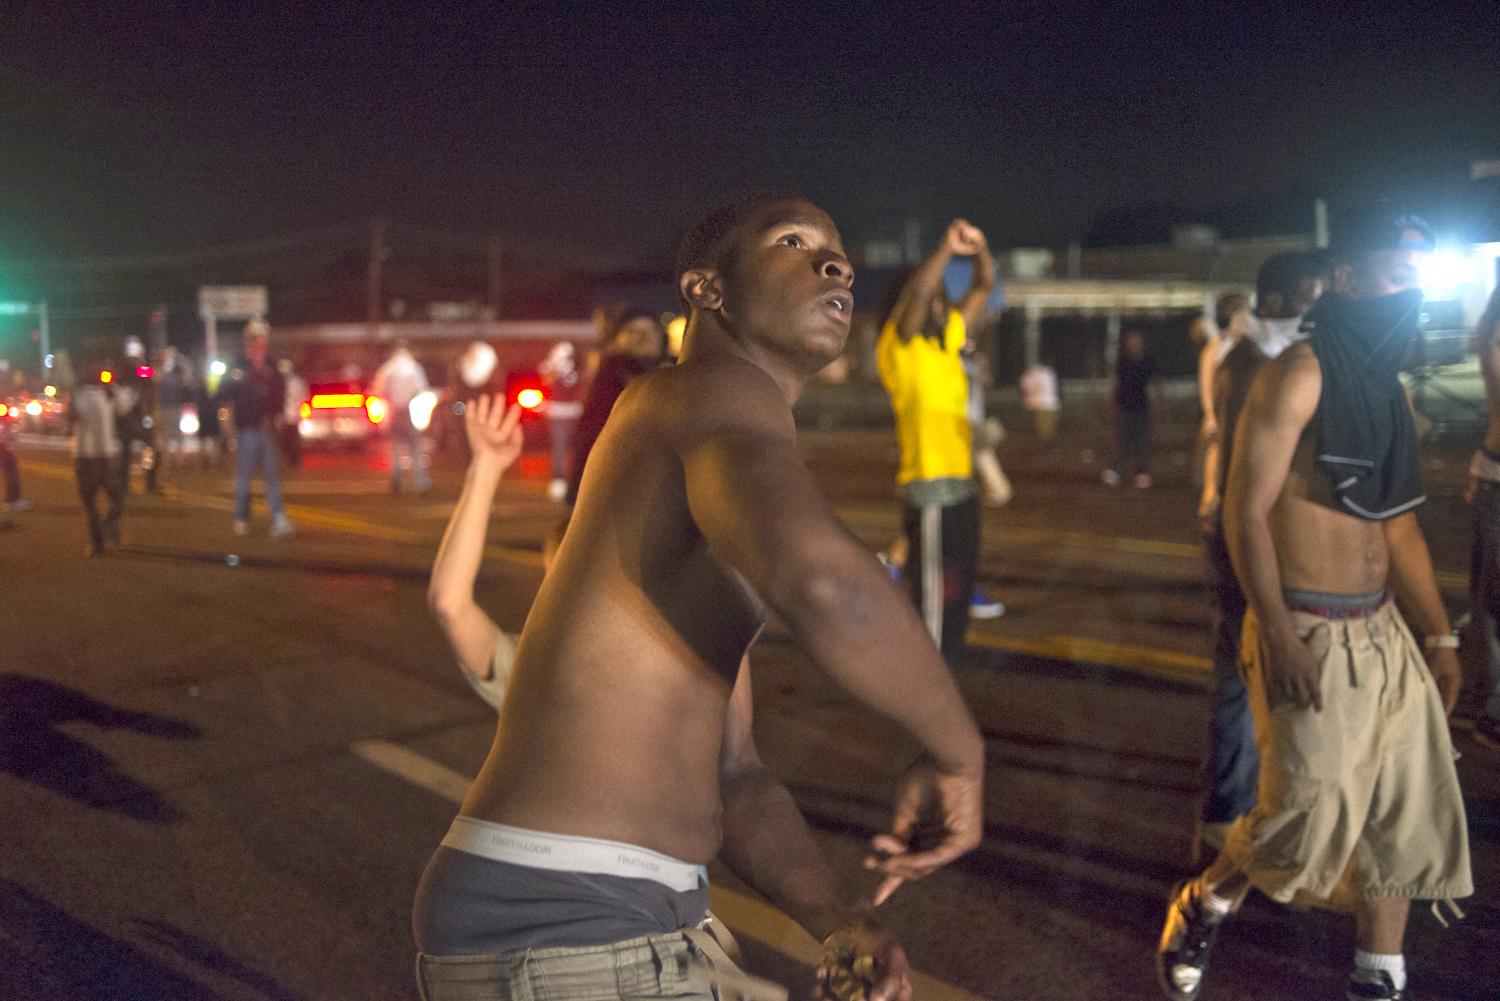 A protestor retaliates against police during violent clashes in Ferguson, Mo. on Aug. 17, 2014. (Jon Lowenstein—Noor for TIME)